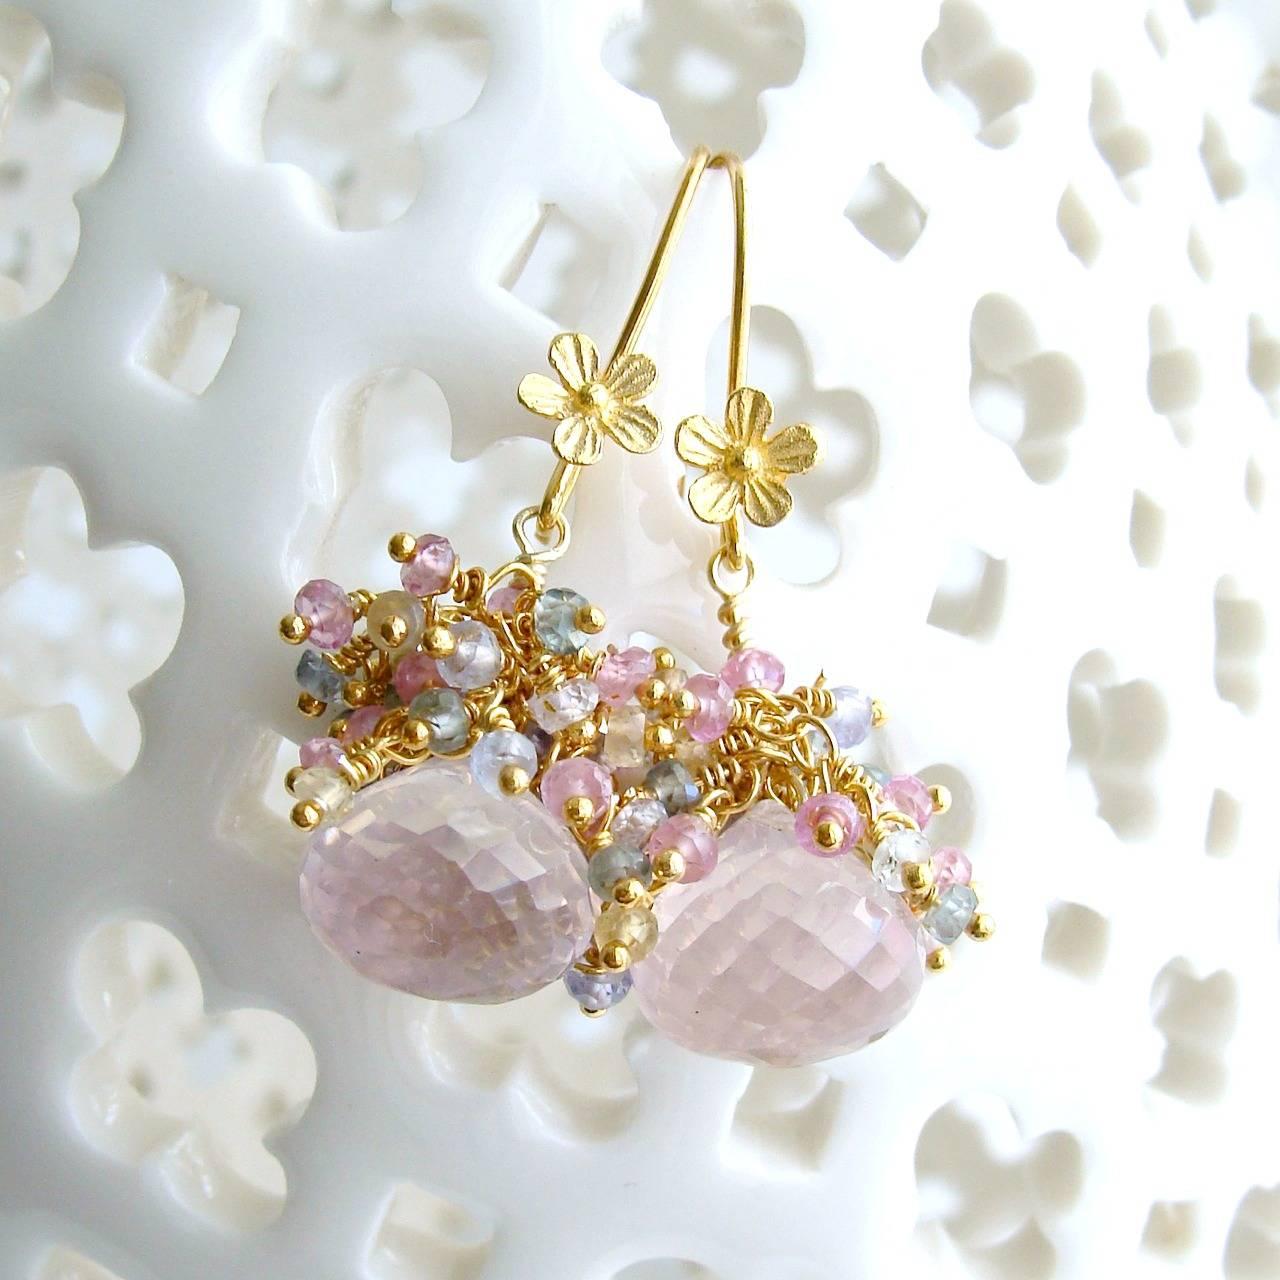 Juliet III Earrings.

Softly colored rose quartz faceted “kisses” have been topped with a cascade of delicate pastel sapphire tendrils creating a pair of romantic fairy tale earrings.  The gold vermeil earrings have been paired with an ear wire